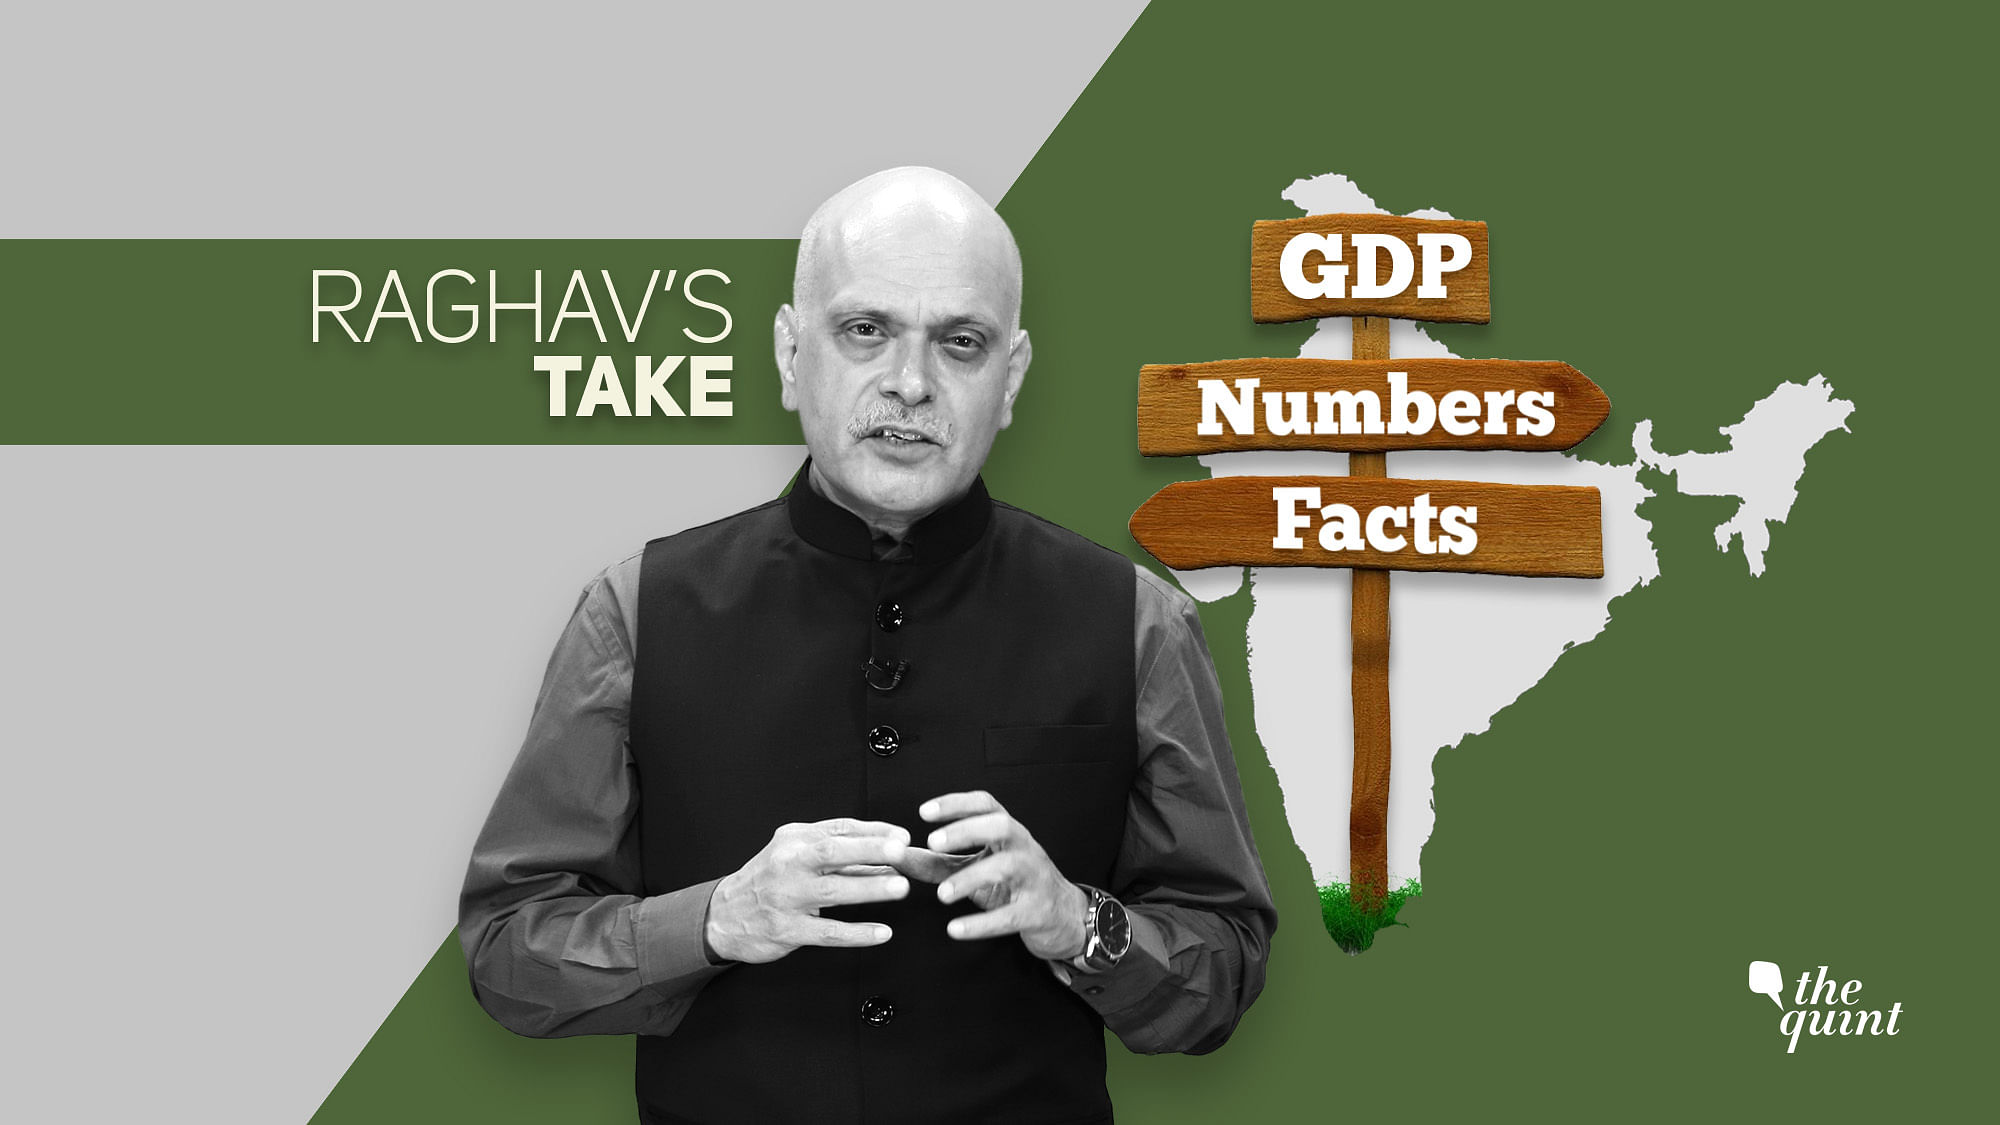 PM Modi cherry-picked all the good stuff from the GDP numbers, but plenty of troublesome facts are left unsaid.